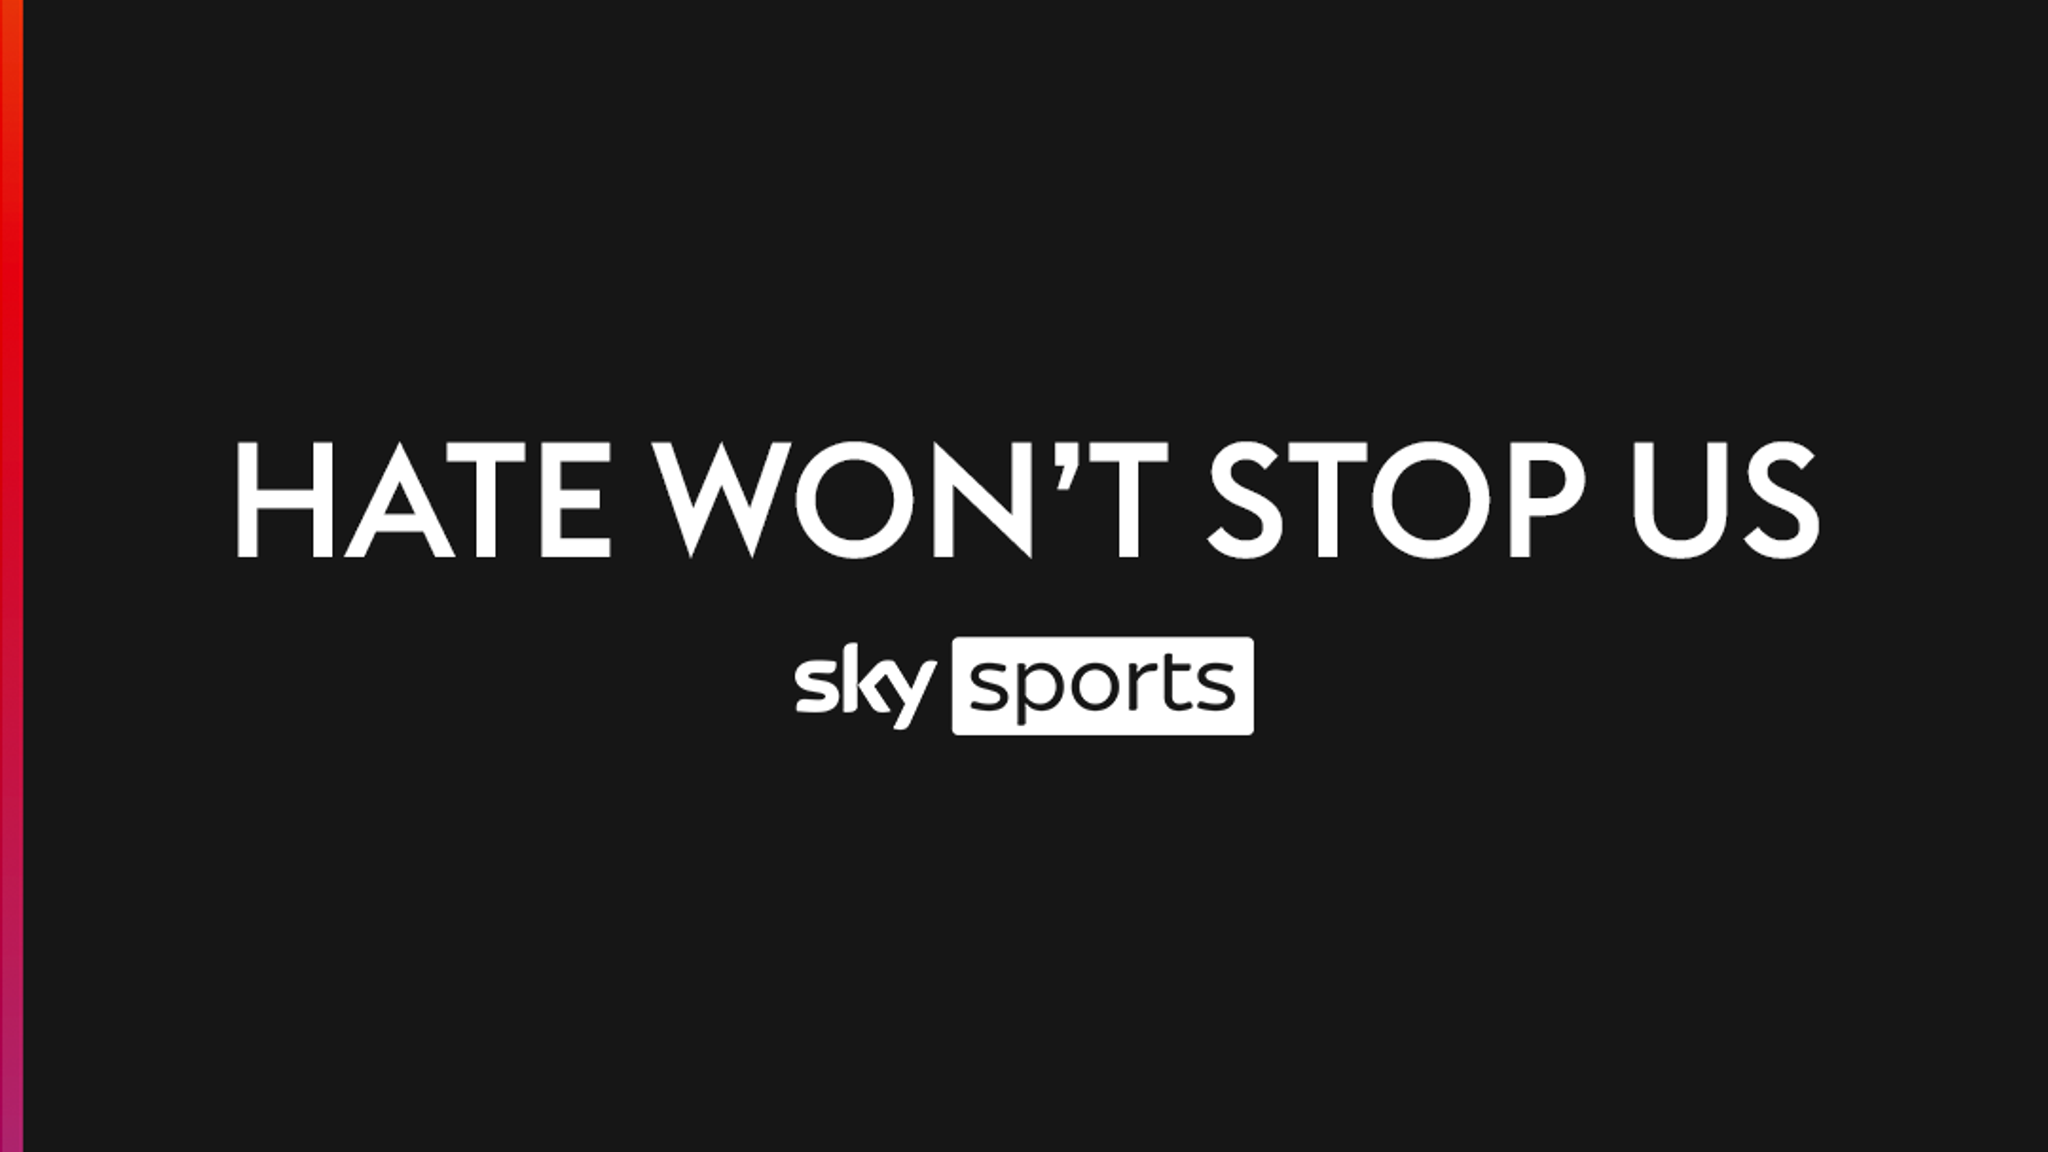 Against Online Hate Sky Sports sets out series of measures to fight online hate and abuse News News Sky Sports